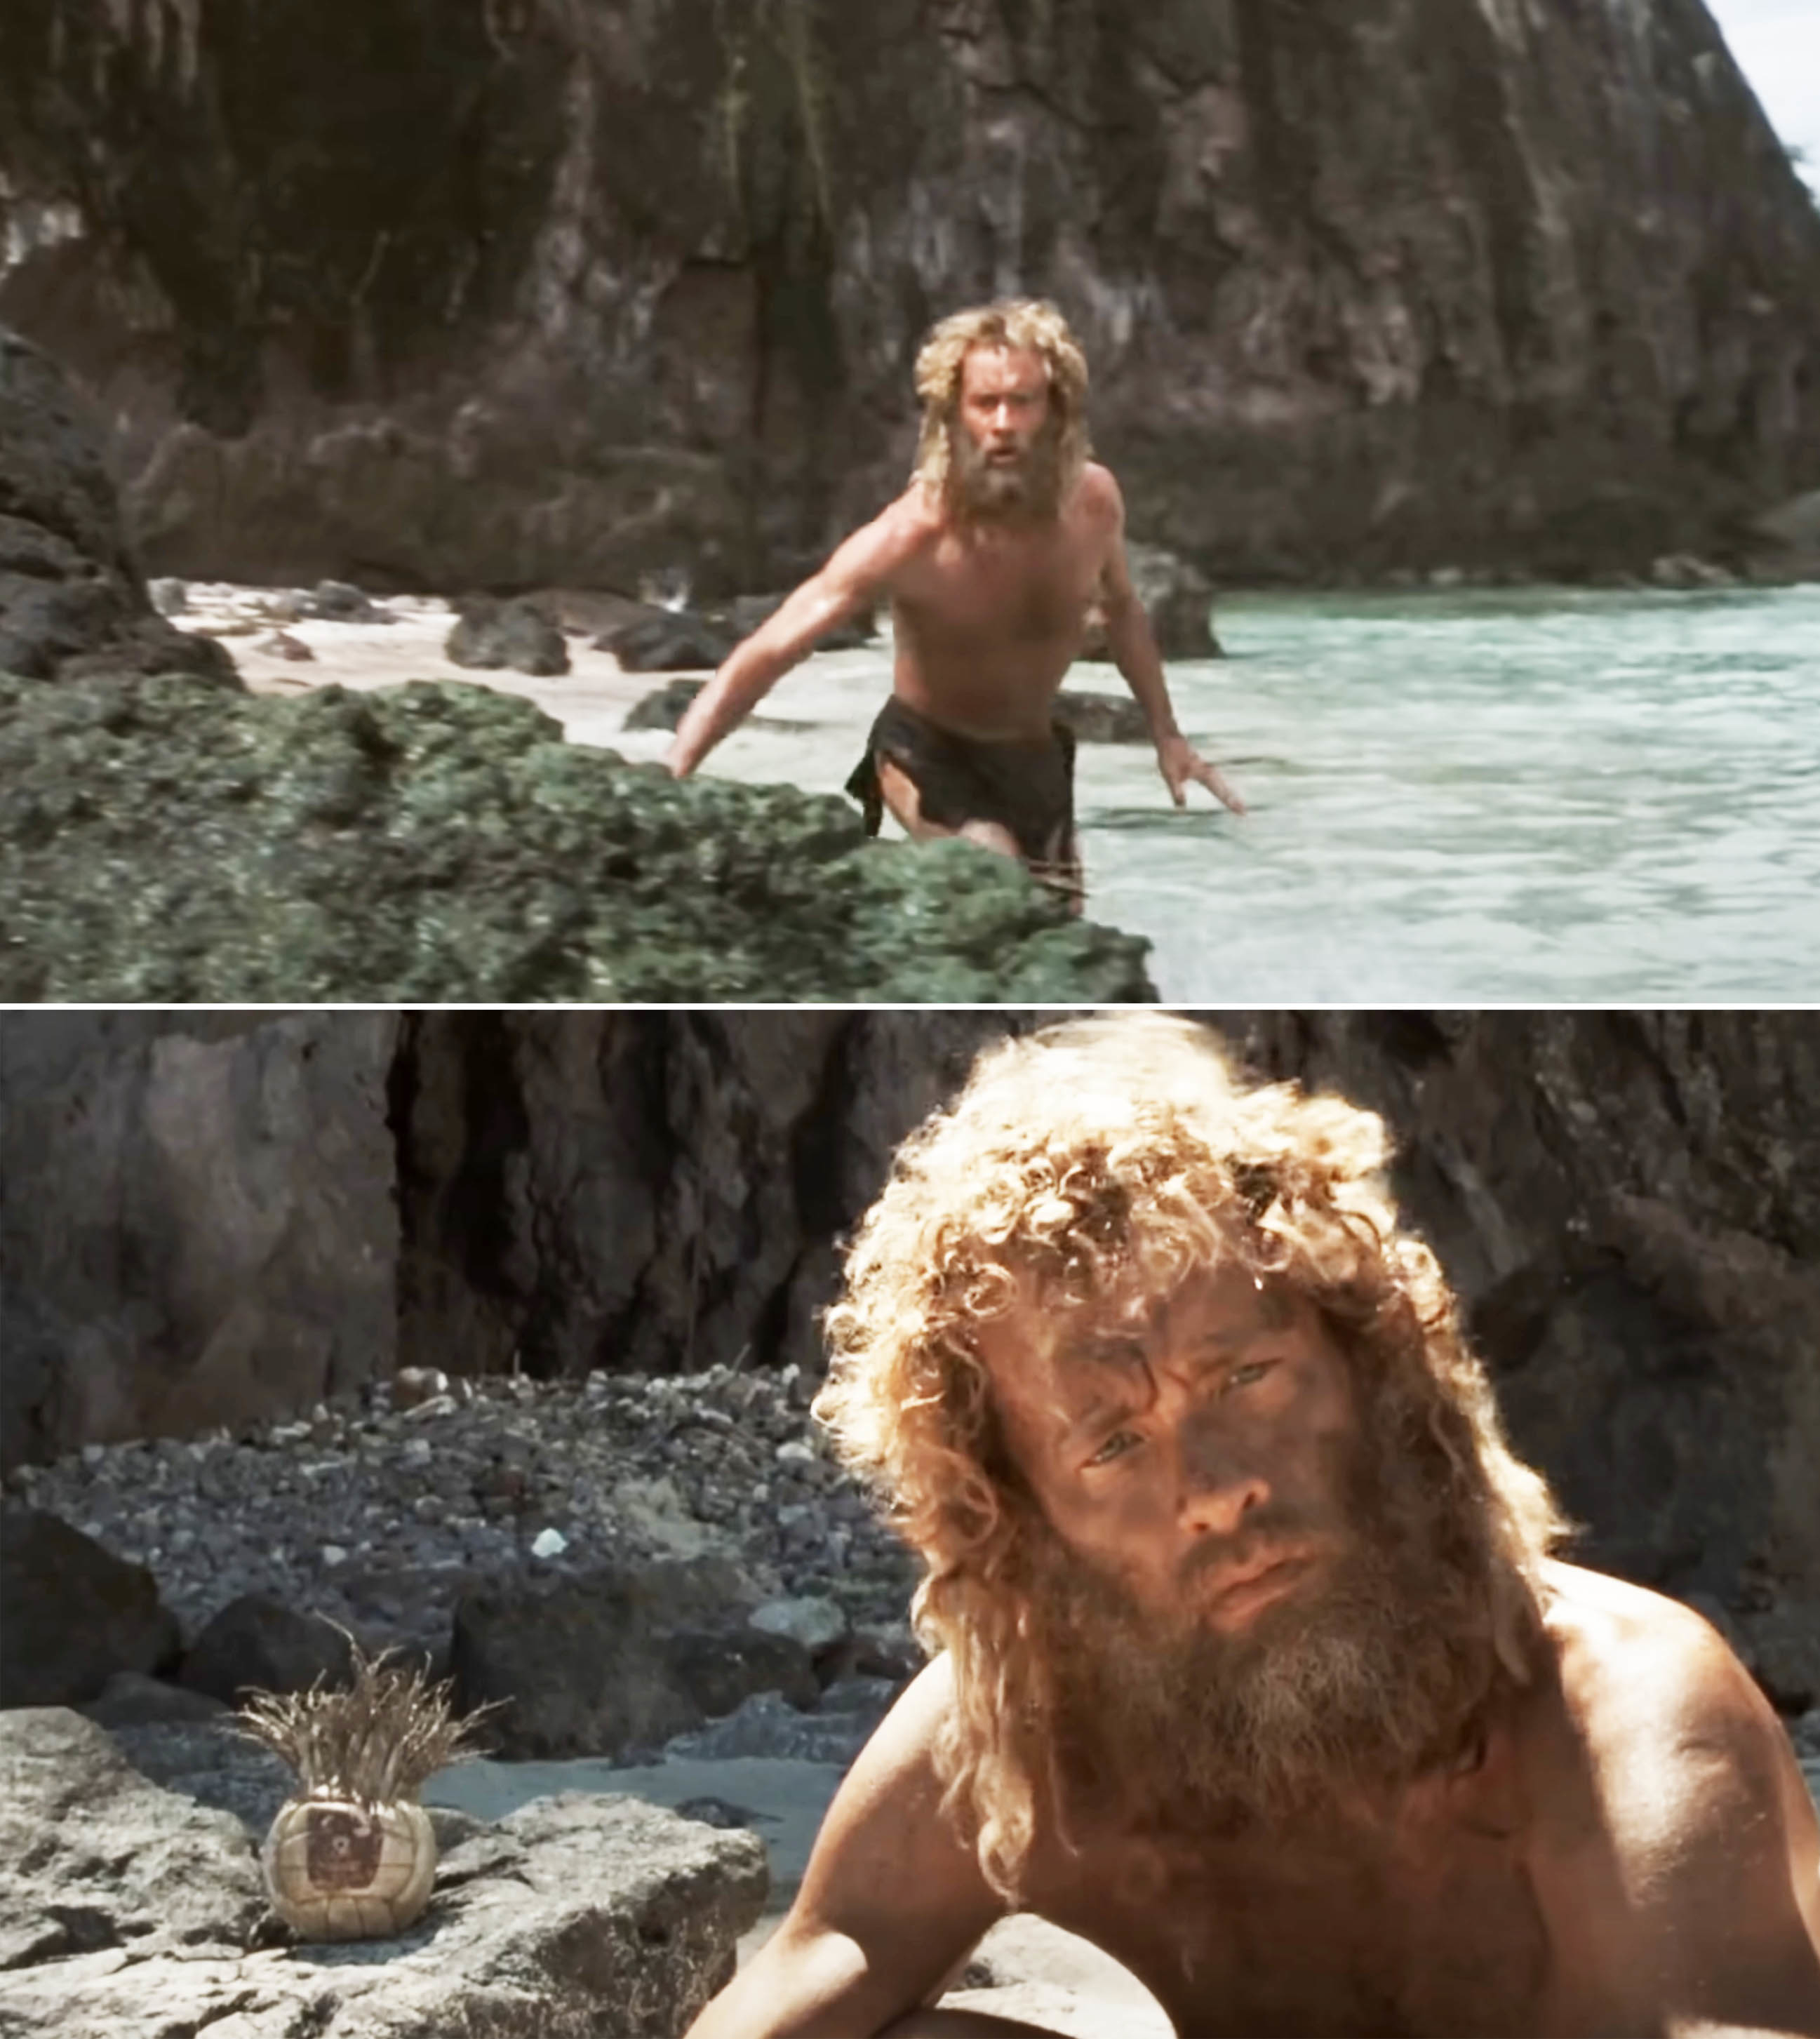 Tom Hanks as character from Cast Away, standing in water and sitting on beach with makeshift companion